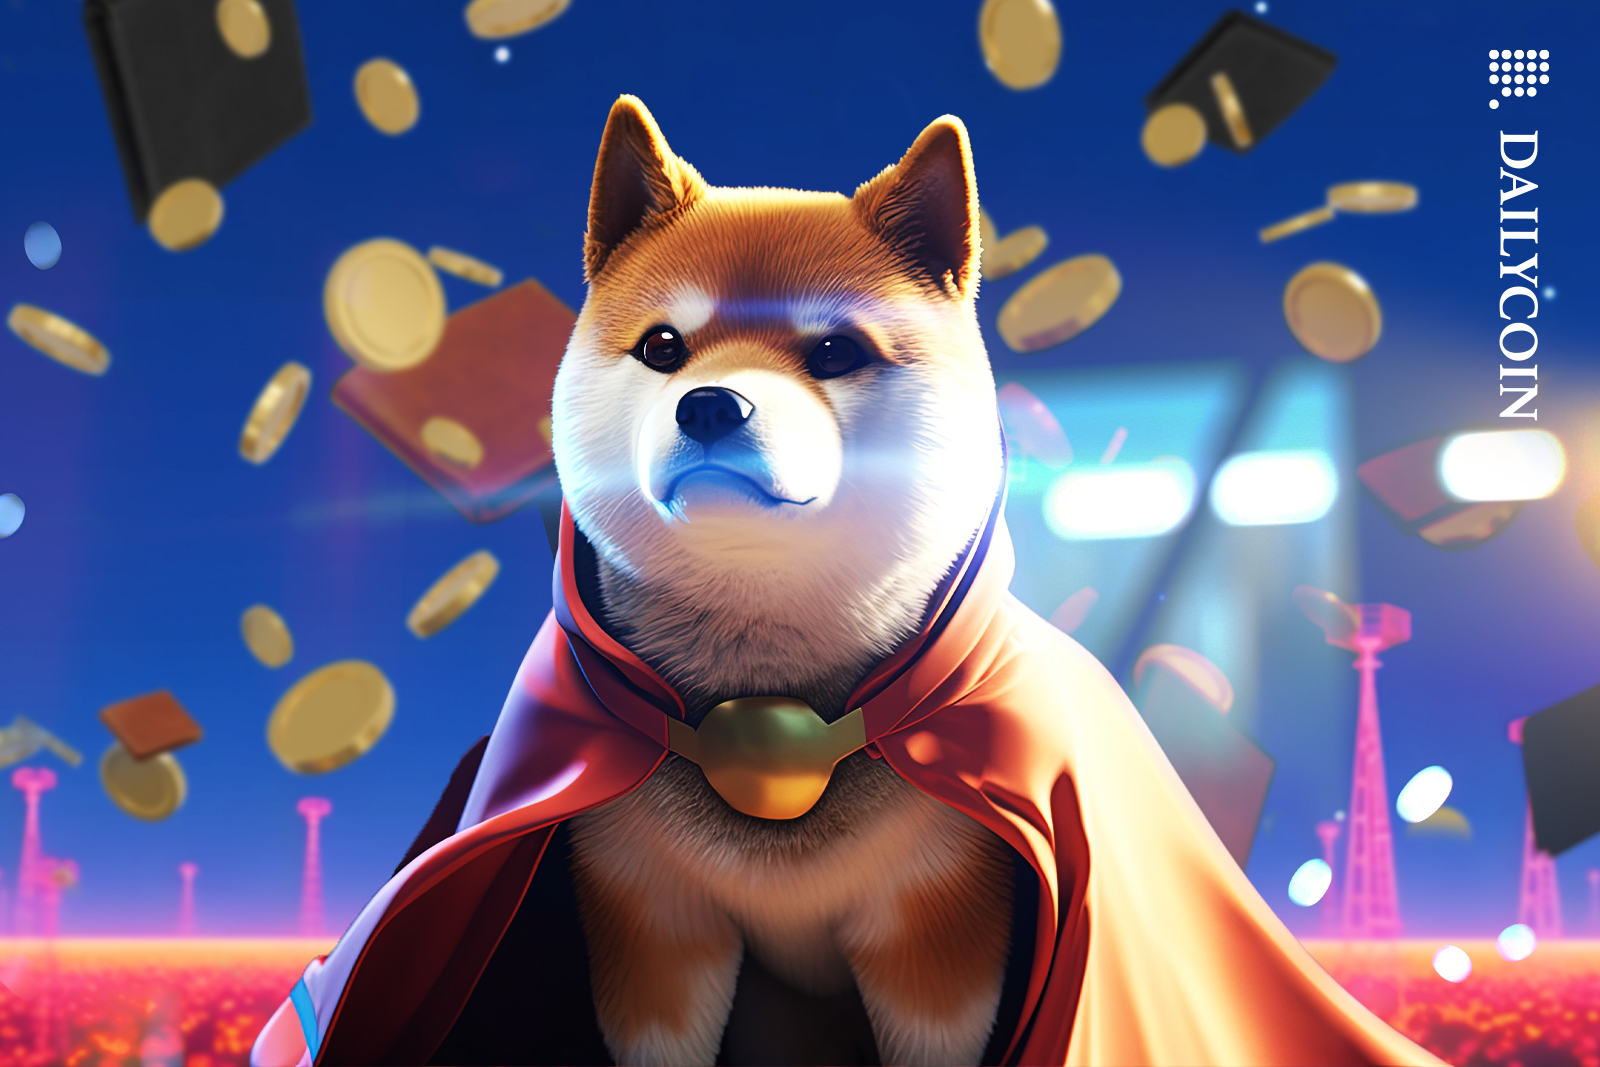 Shiba inu dressed up as a hero, with flying wallets behind him.